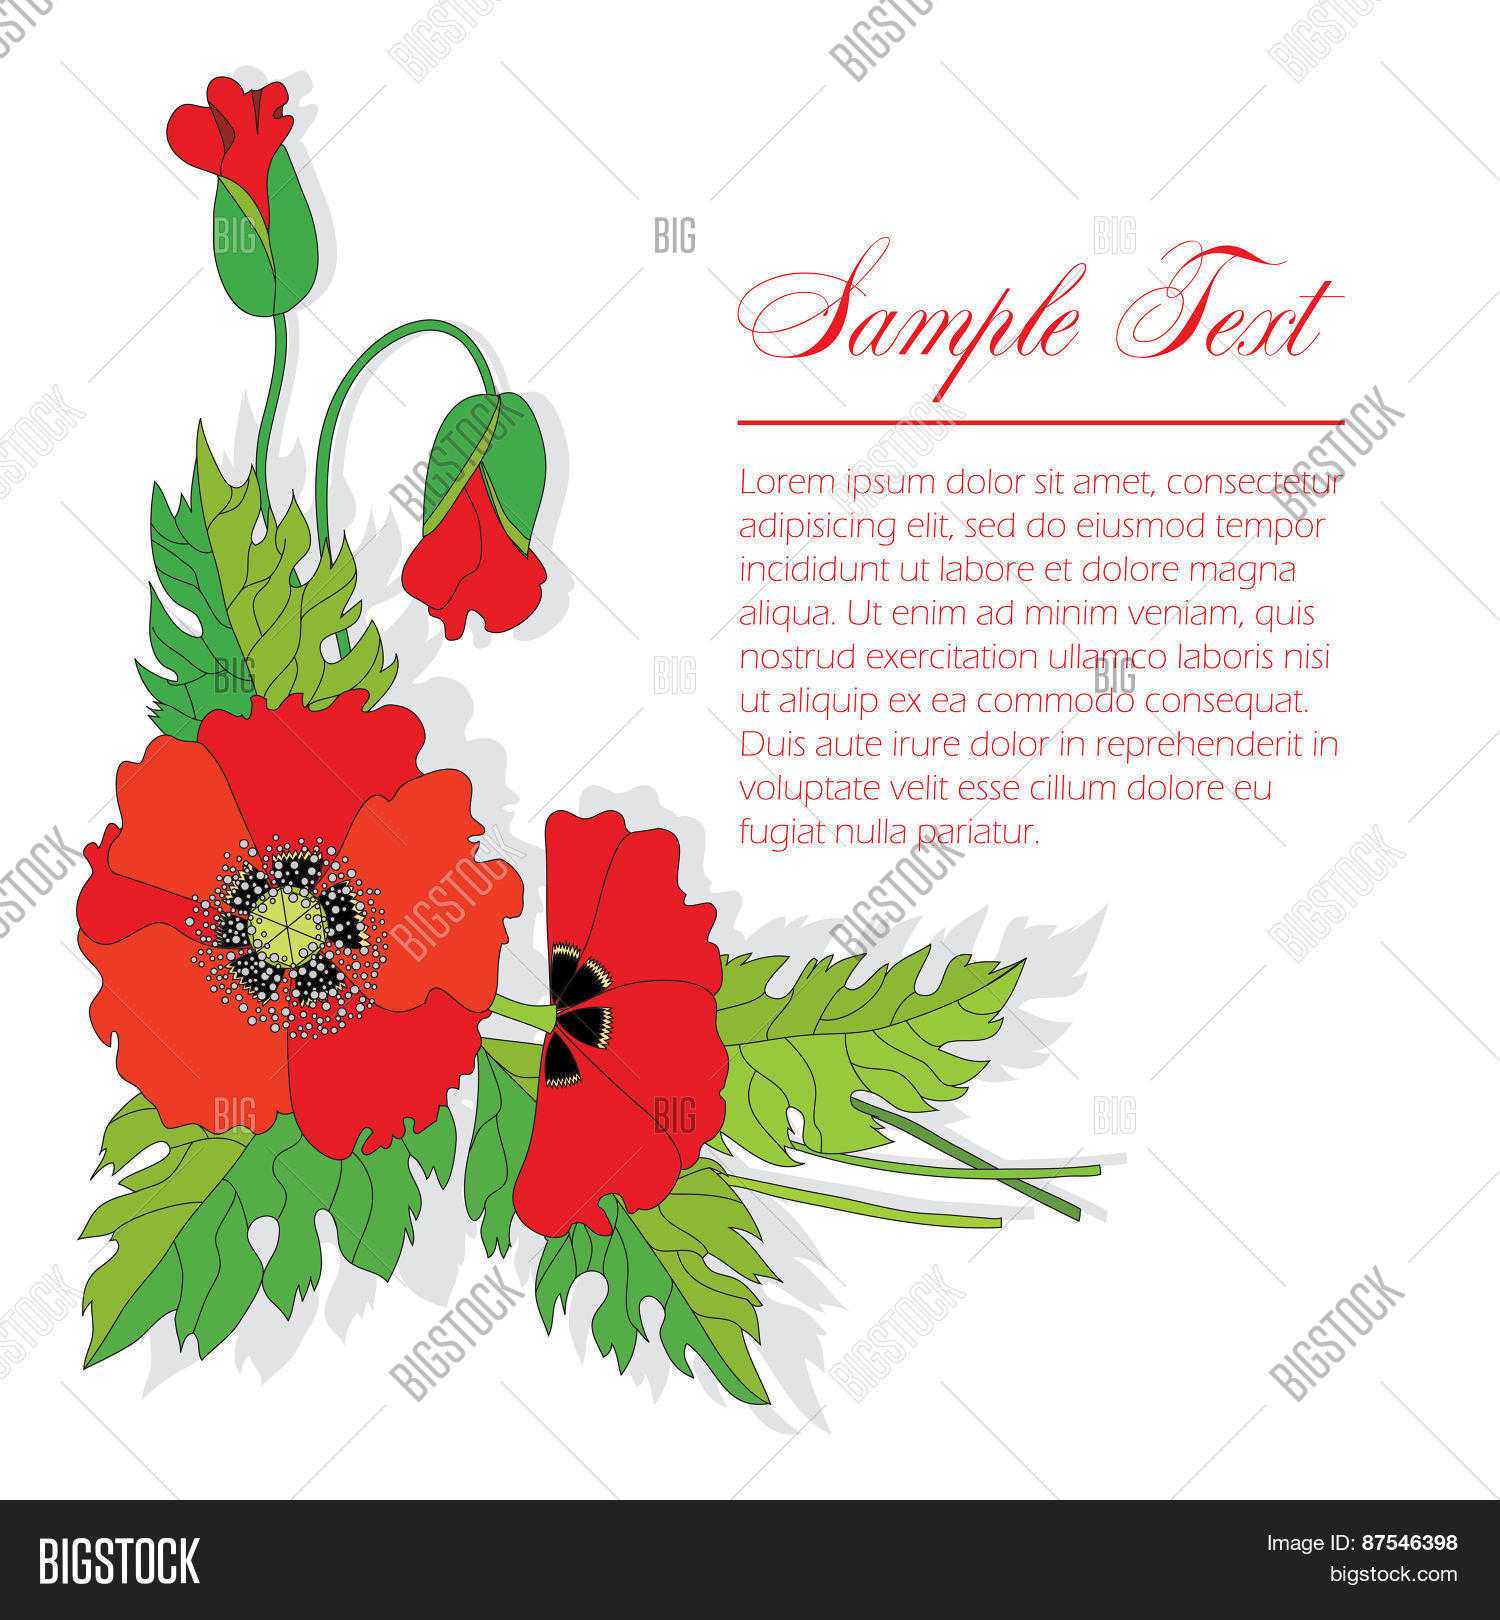 Bouquet Poppies Vector & Photo (Free Trial) | Bigstock With Regard To Congratulations Banner Template